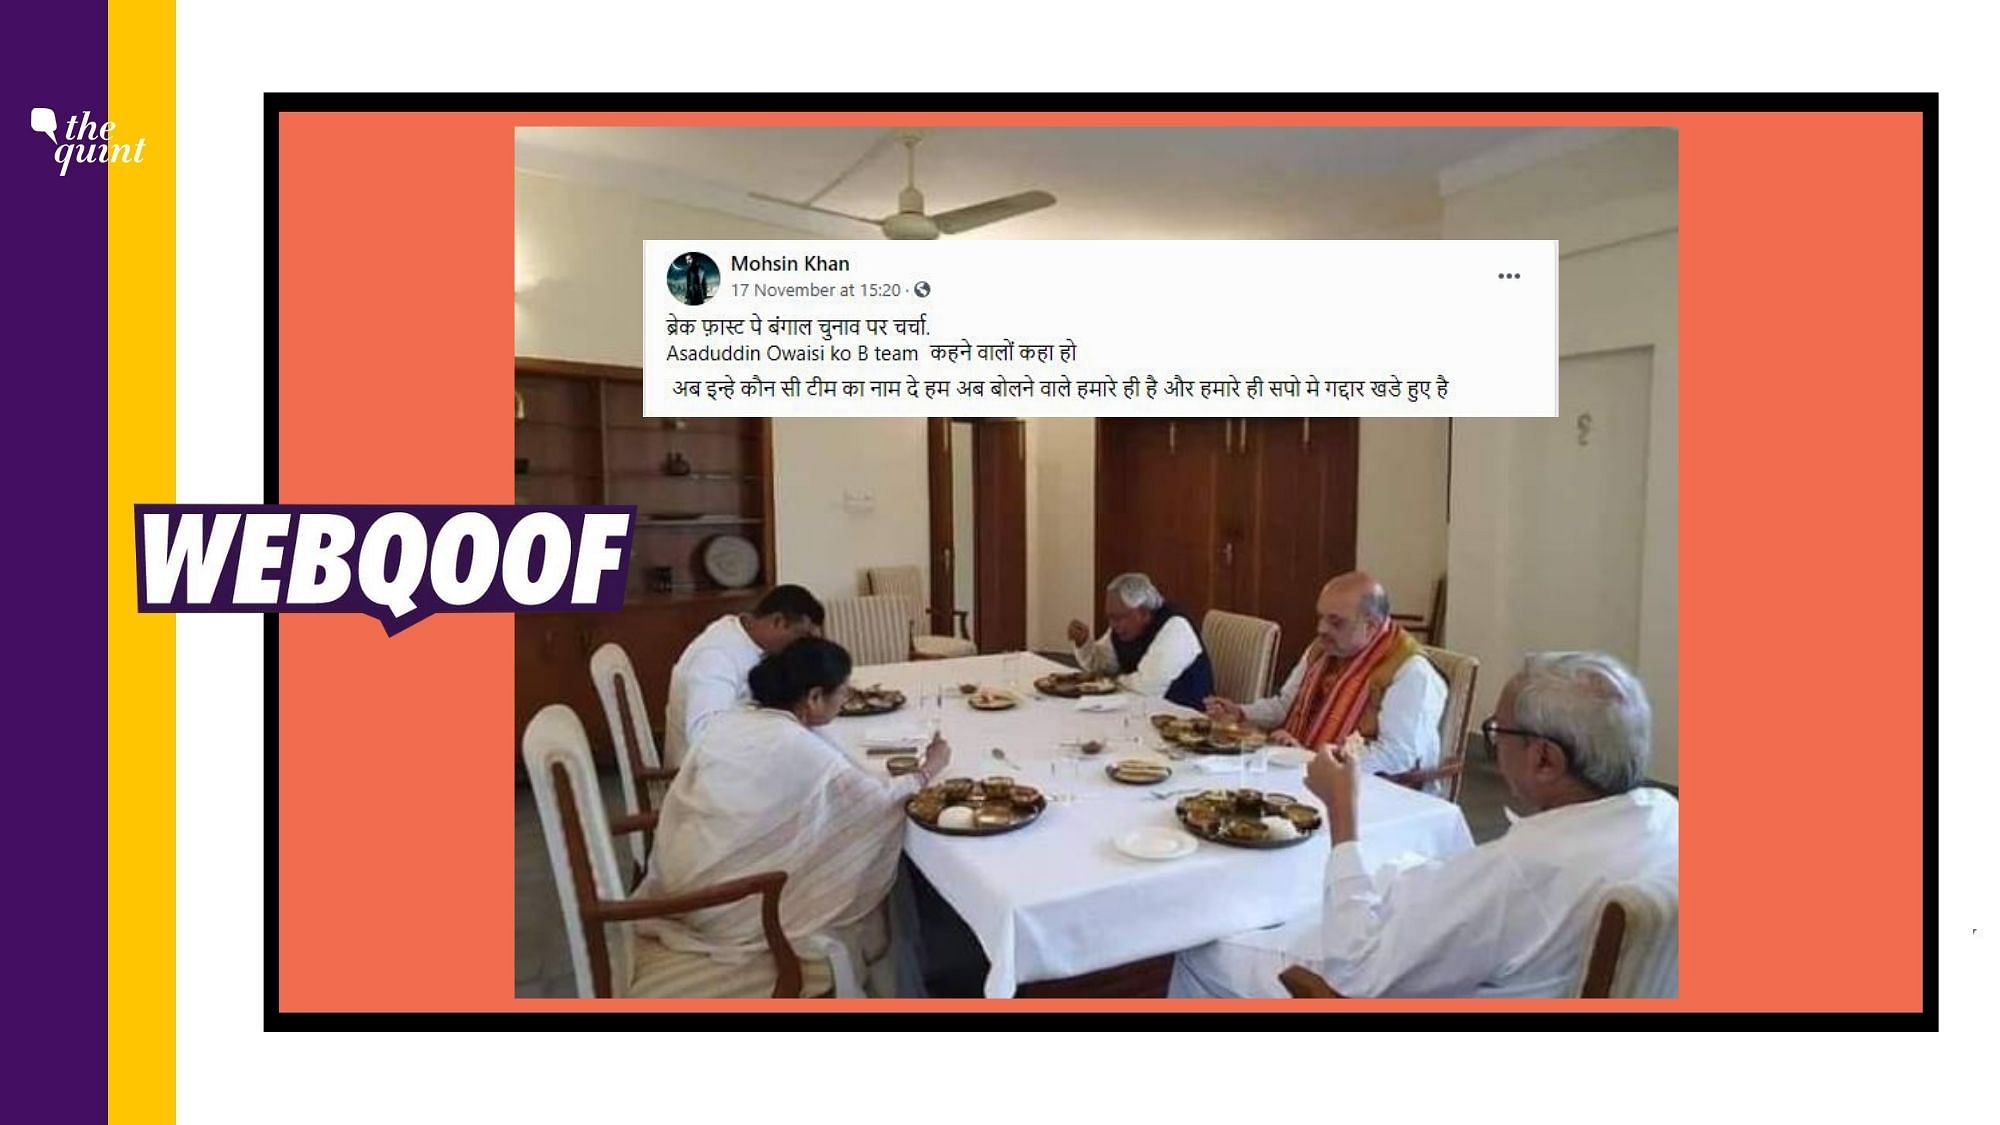 The image is from February 2020 when Amit Shah travelled to Odisha to attend a meeting of the Eastern Zonal Council.